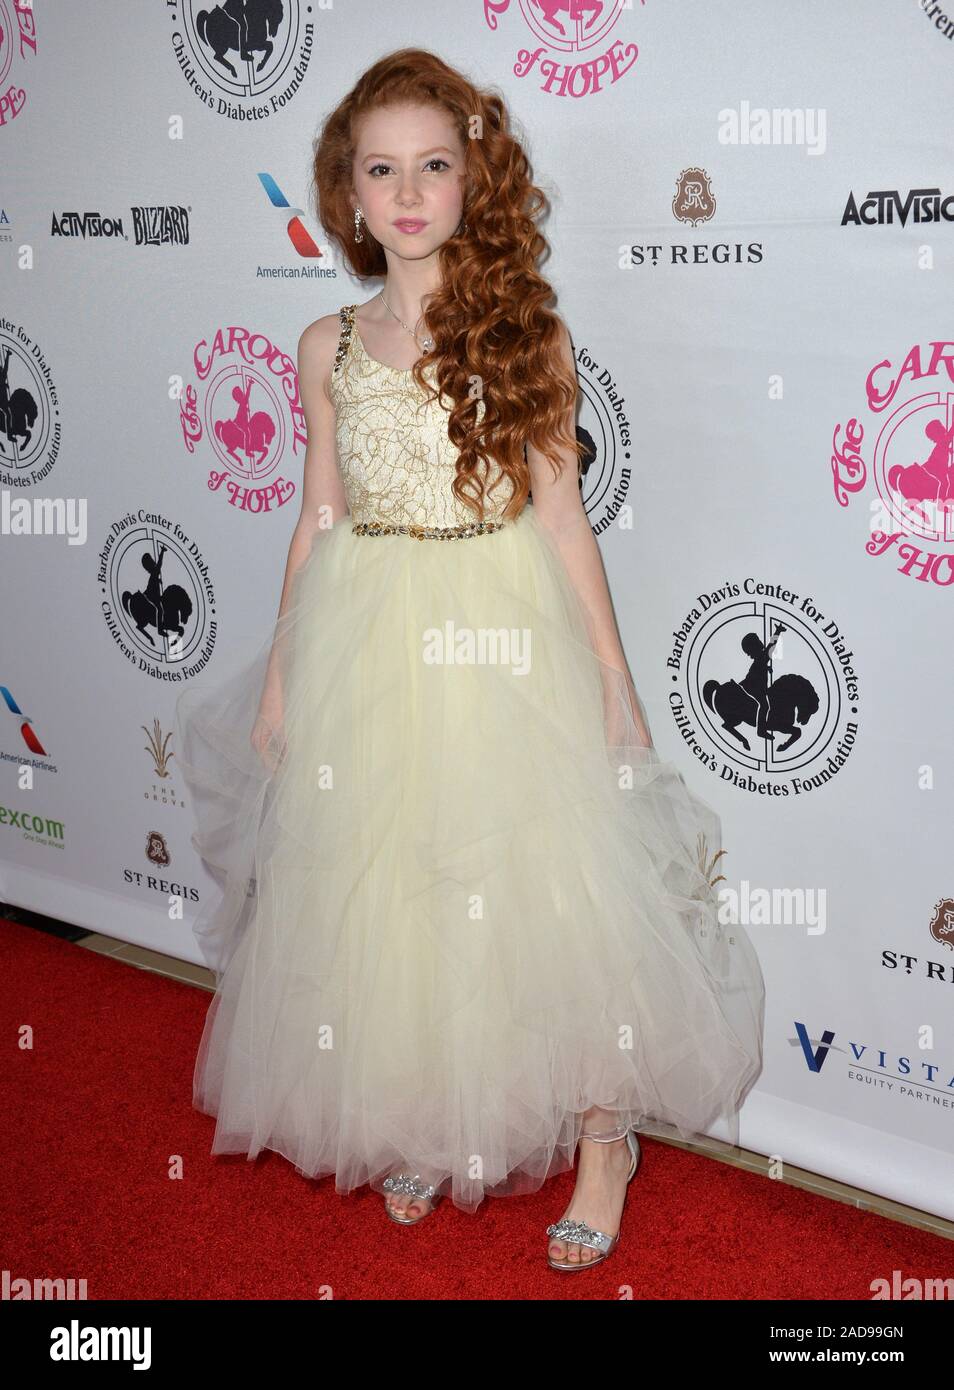 BEVERLY HILLS, CA. October 8, 2016: Francesca Capaldi at the 2016 Carousel of Hope Ball at the Beverly Hilton Hotel. © 2016 Paul Smith / Featureflash Stock Photo